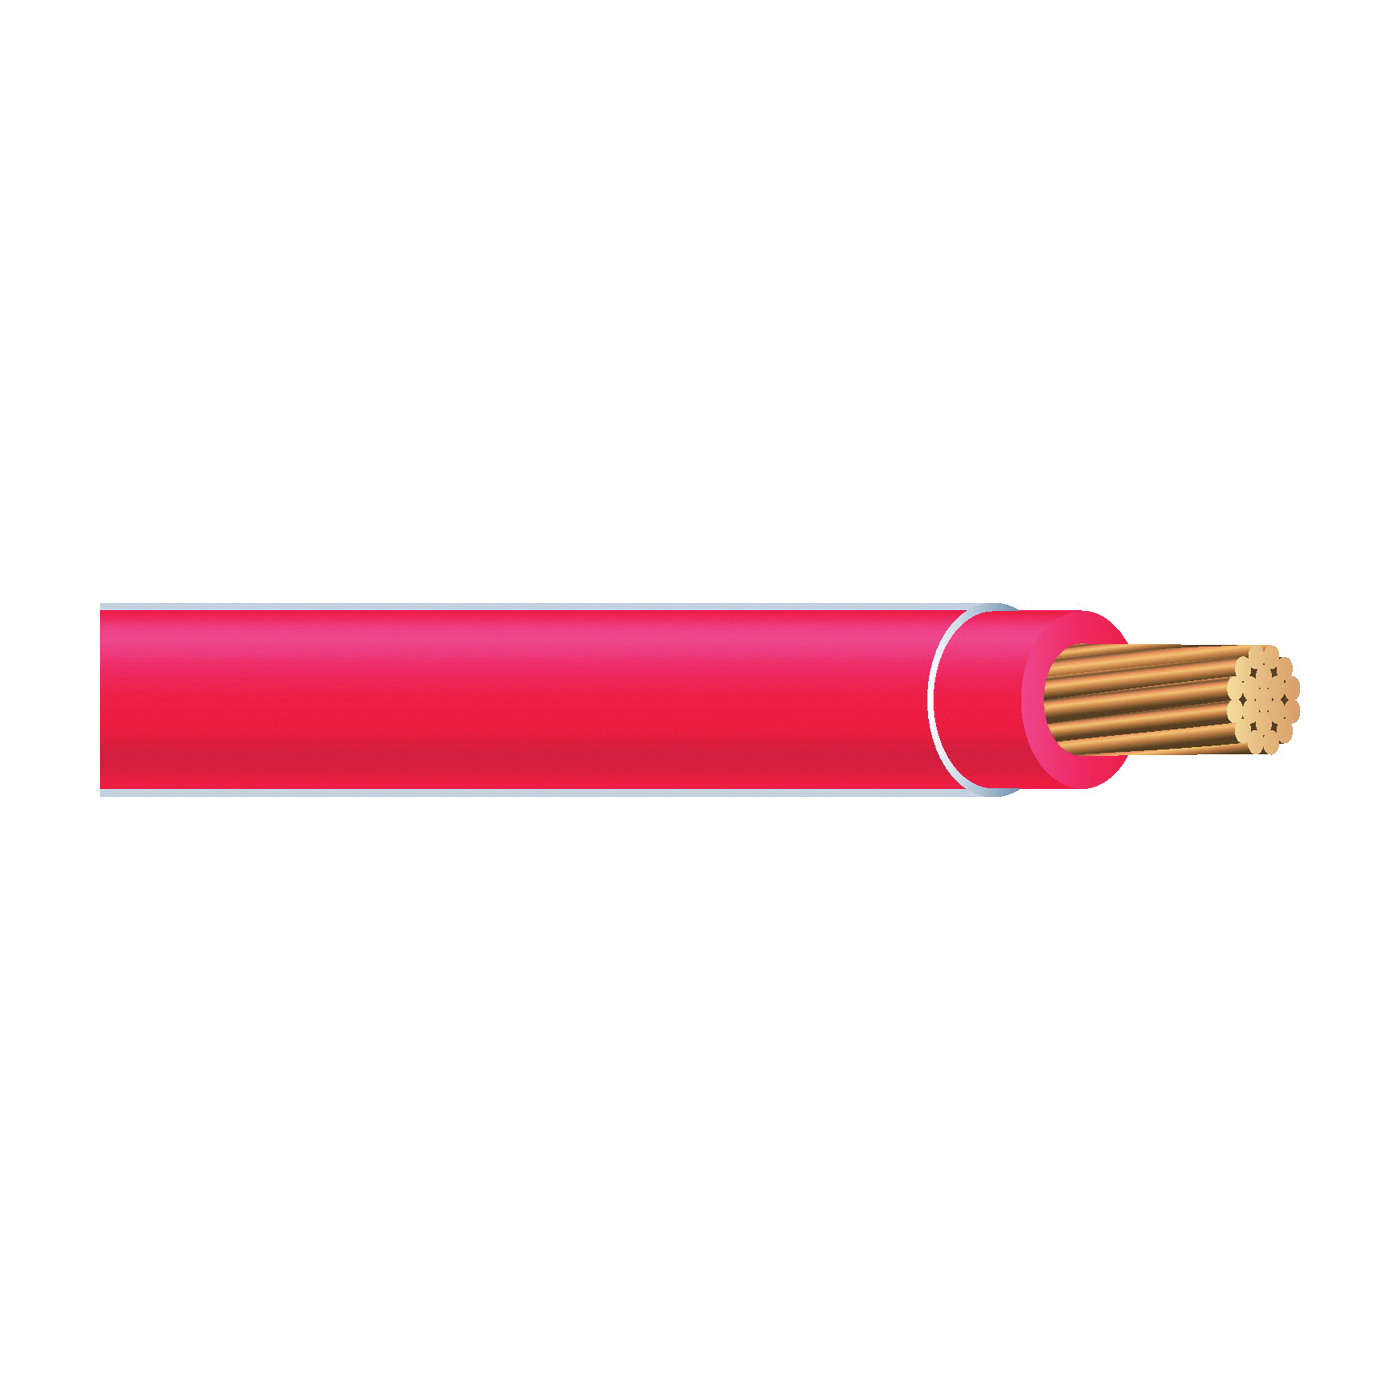 Southwire 22975737 Building Wire, THHN, 10 AWG Wire, 1 -Conductor, 100 ft L, Stranded Copper Conductor, Red Nylon Sheath